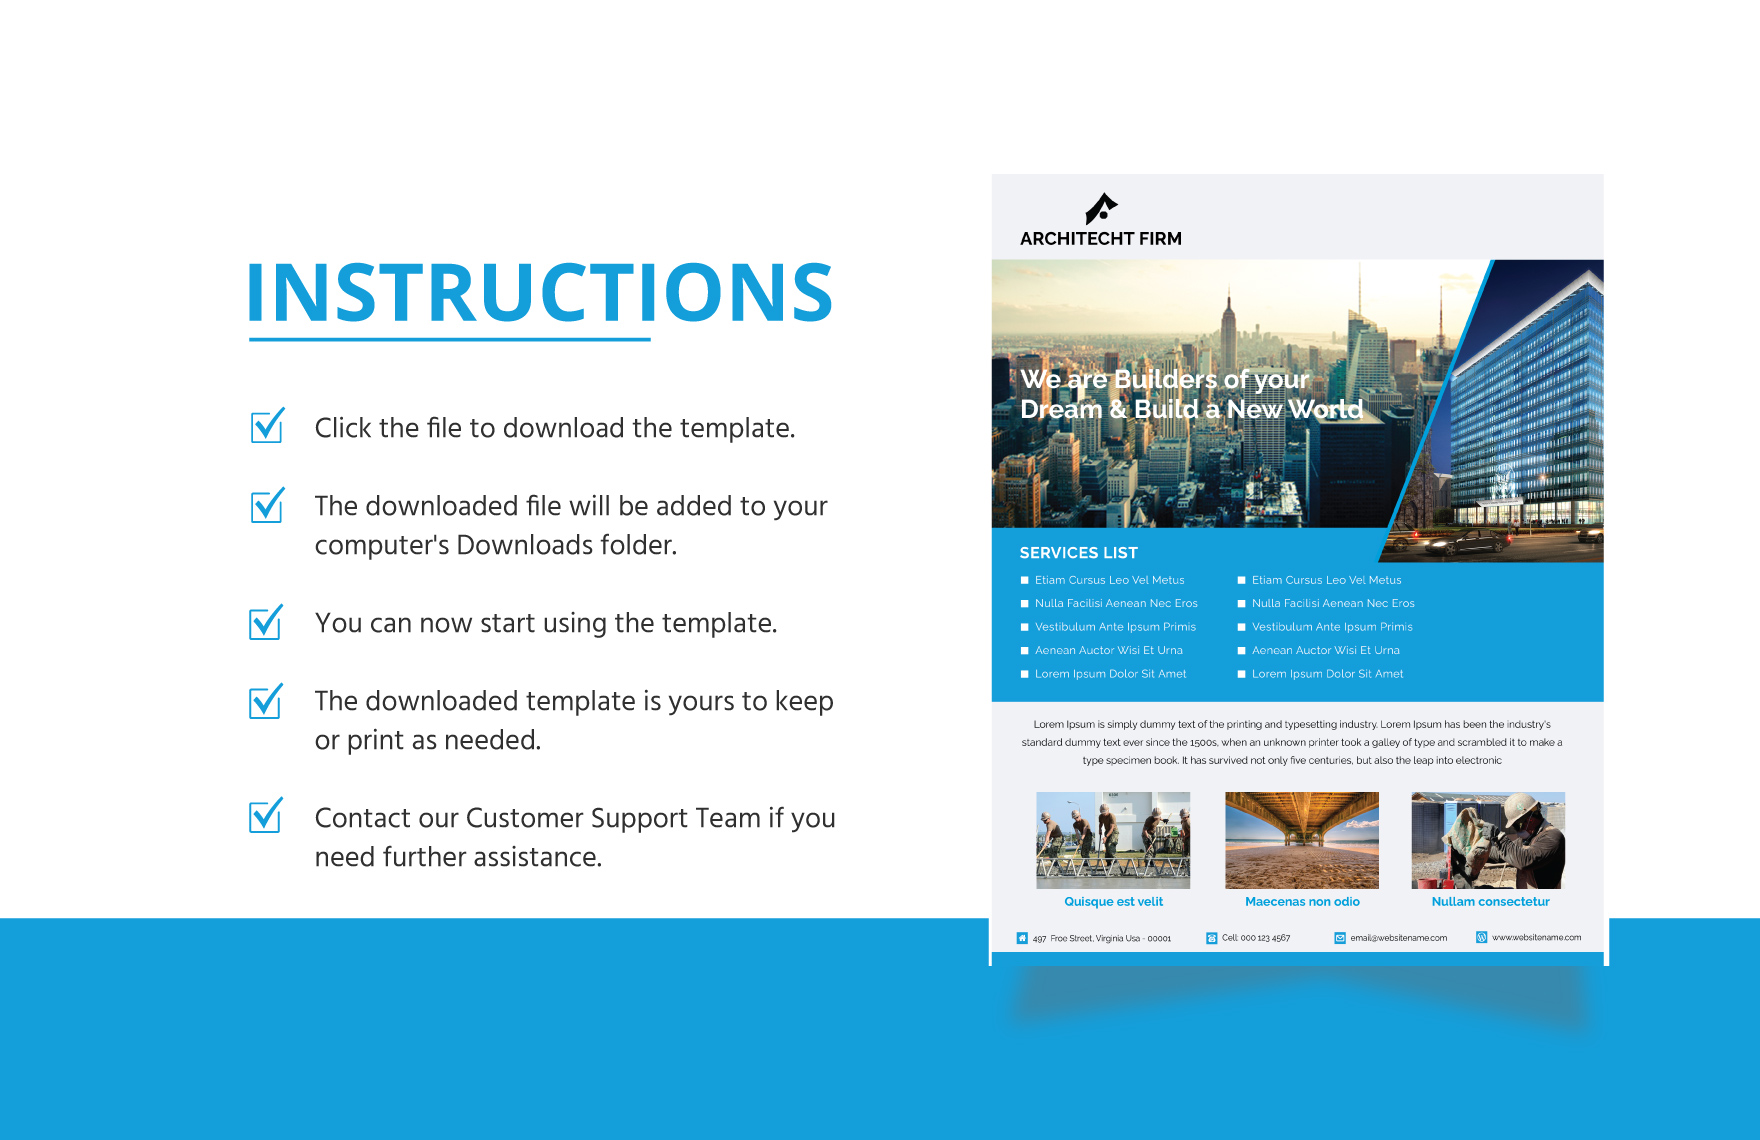 Architect Firm Flyer Template